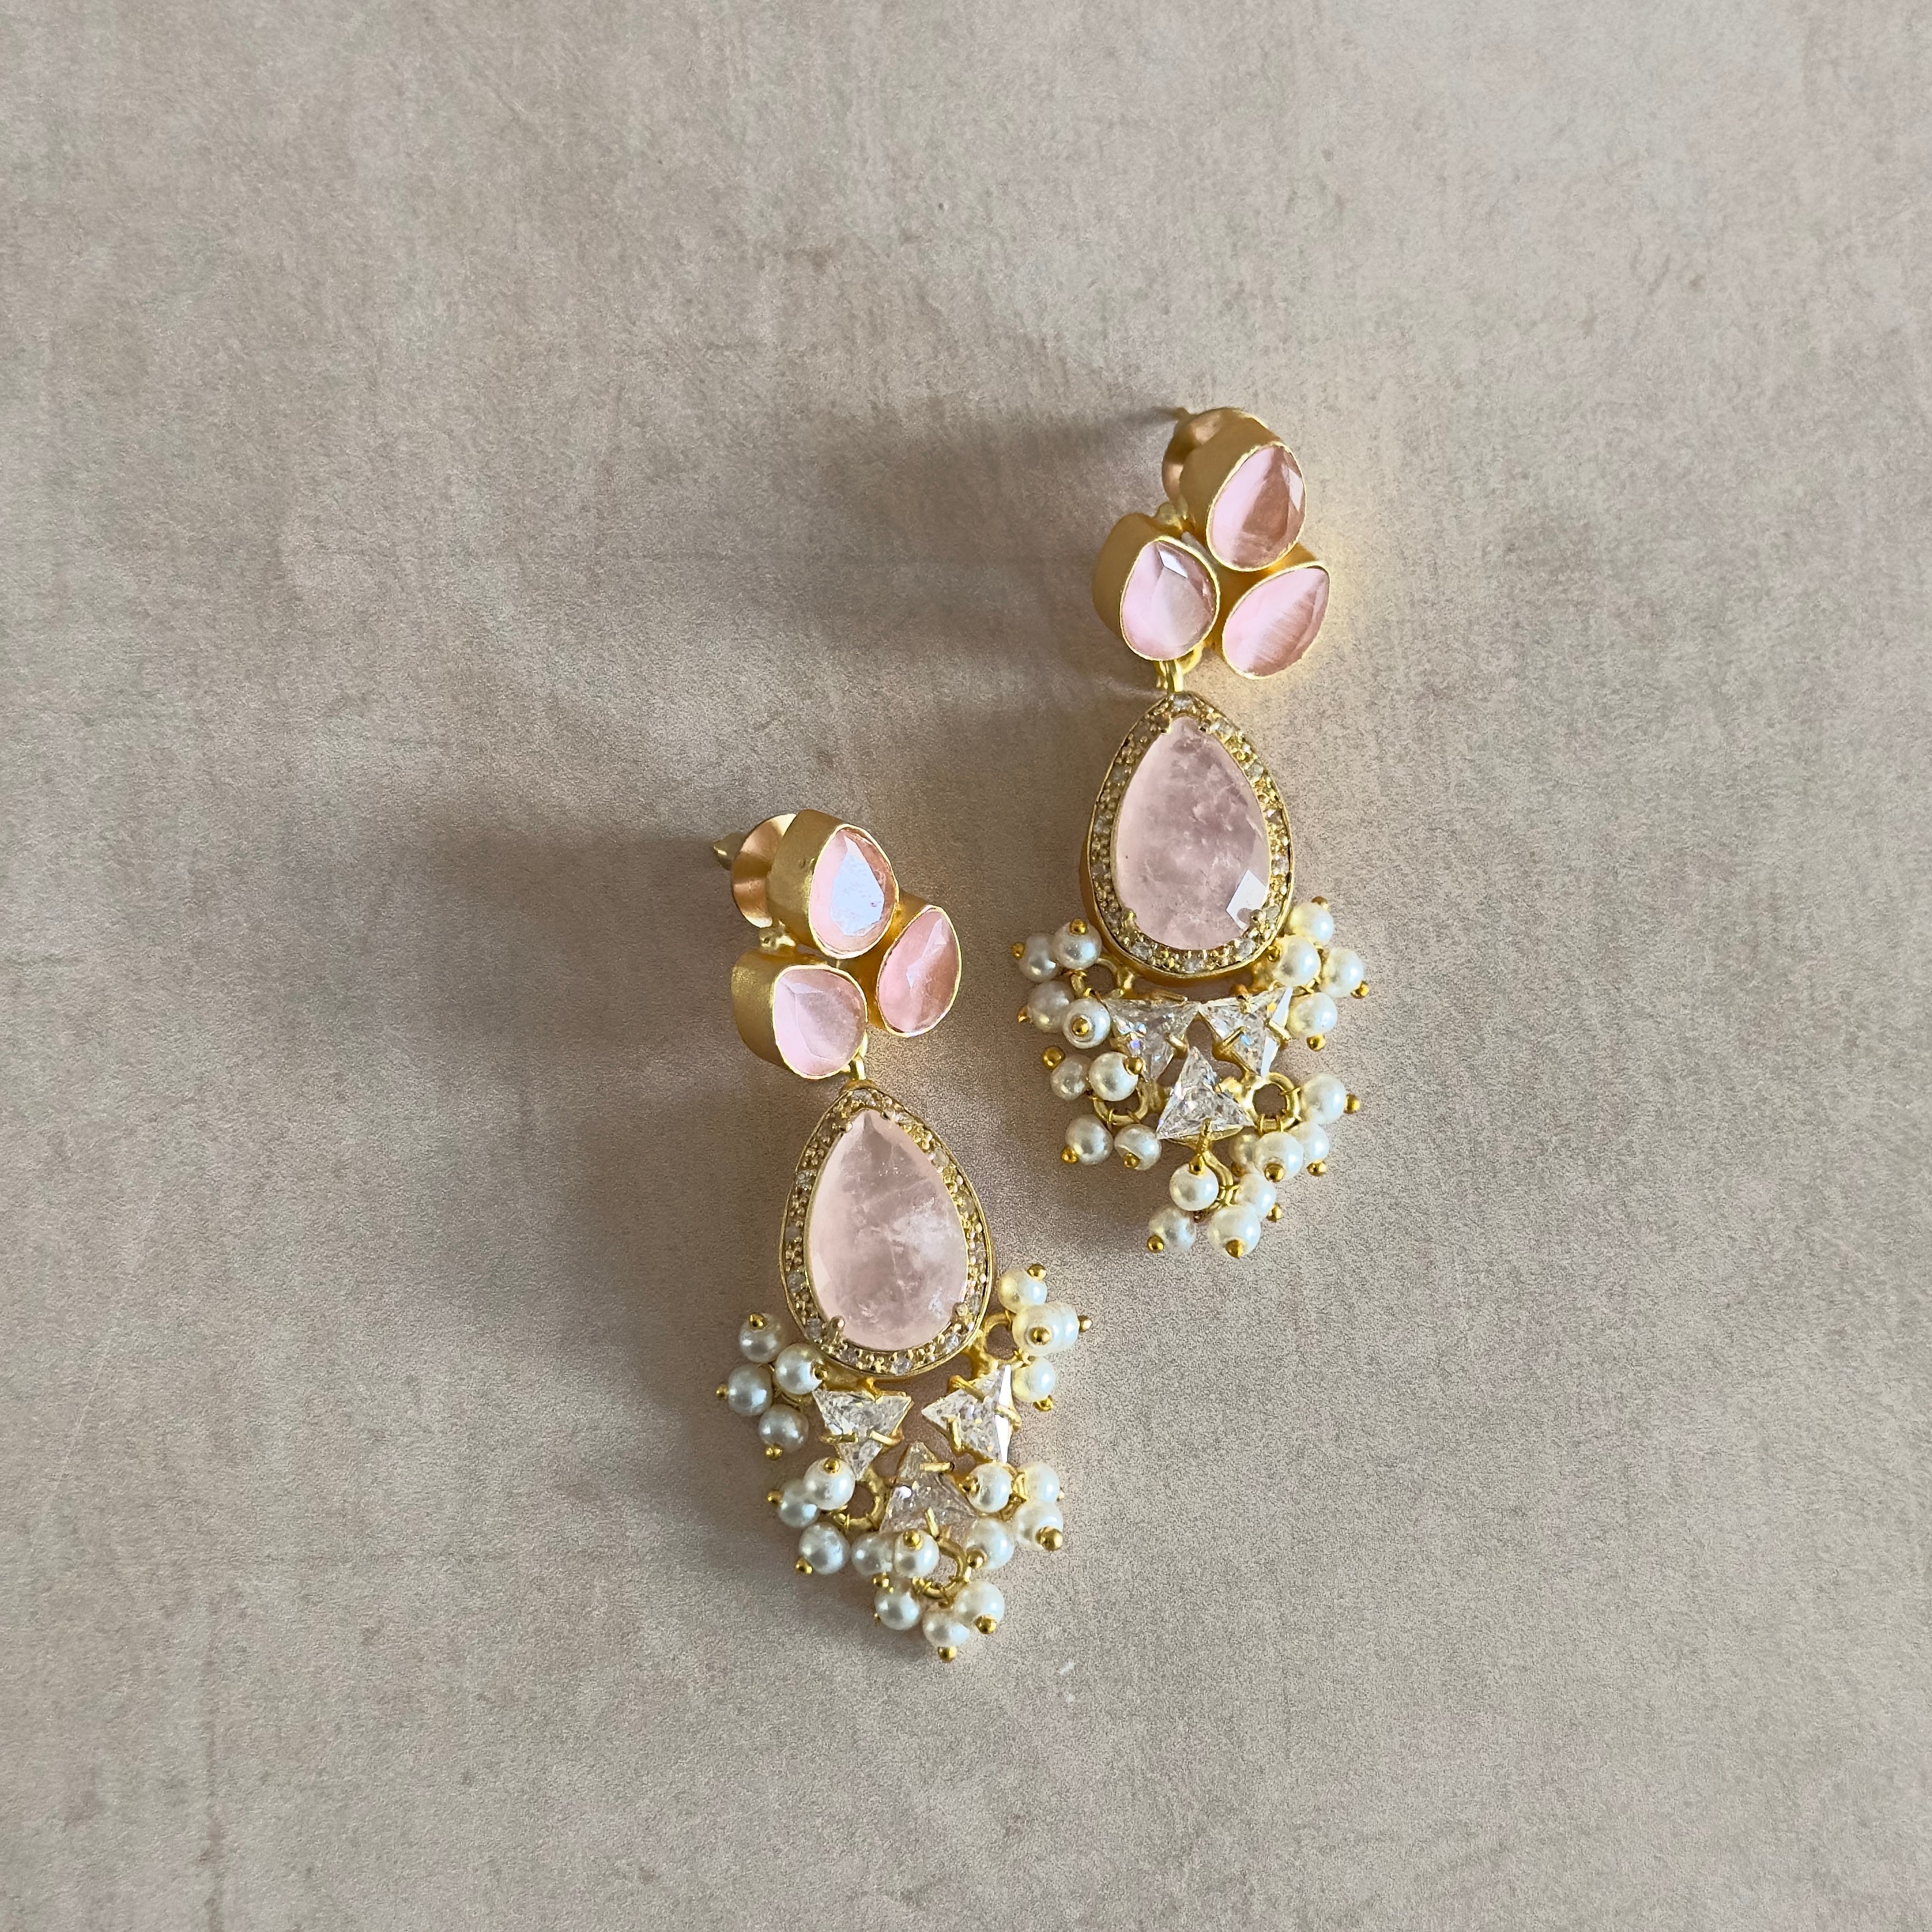 Elevate your style with our Romee Pink Drop Earrings! These stunning earrings feature a combination of rose quartz and sparkling cz crystals, adding a touch of luxury to any outfit. Make a bold statement and turn heads with these must-have earrings. Perfect for any occasion and sure to impress!